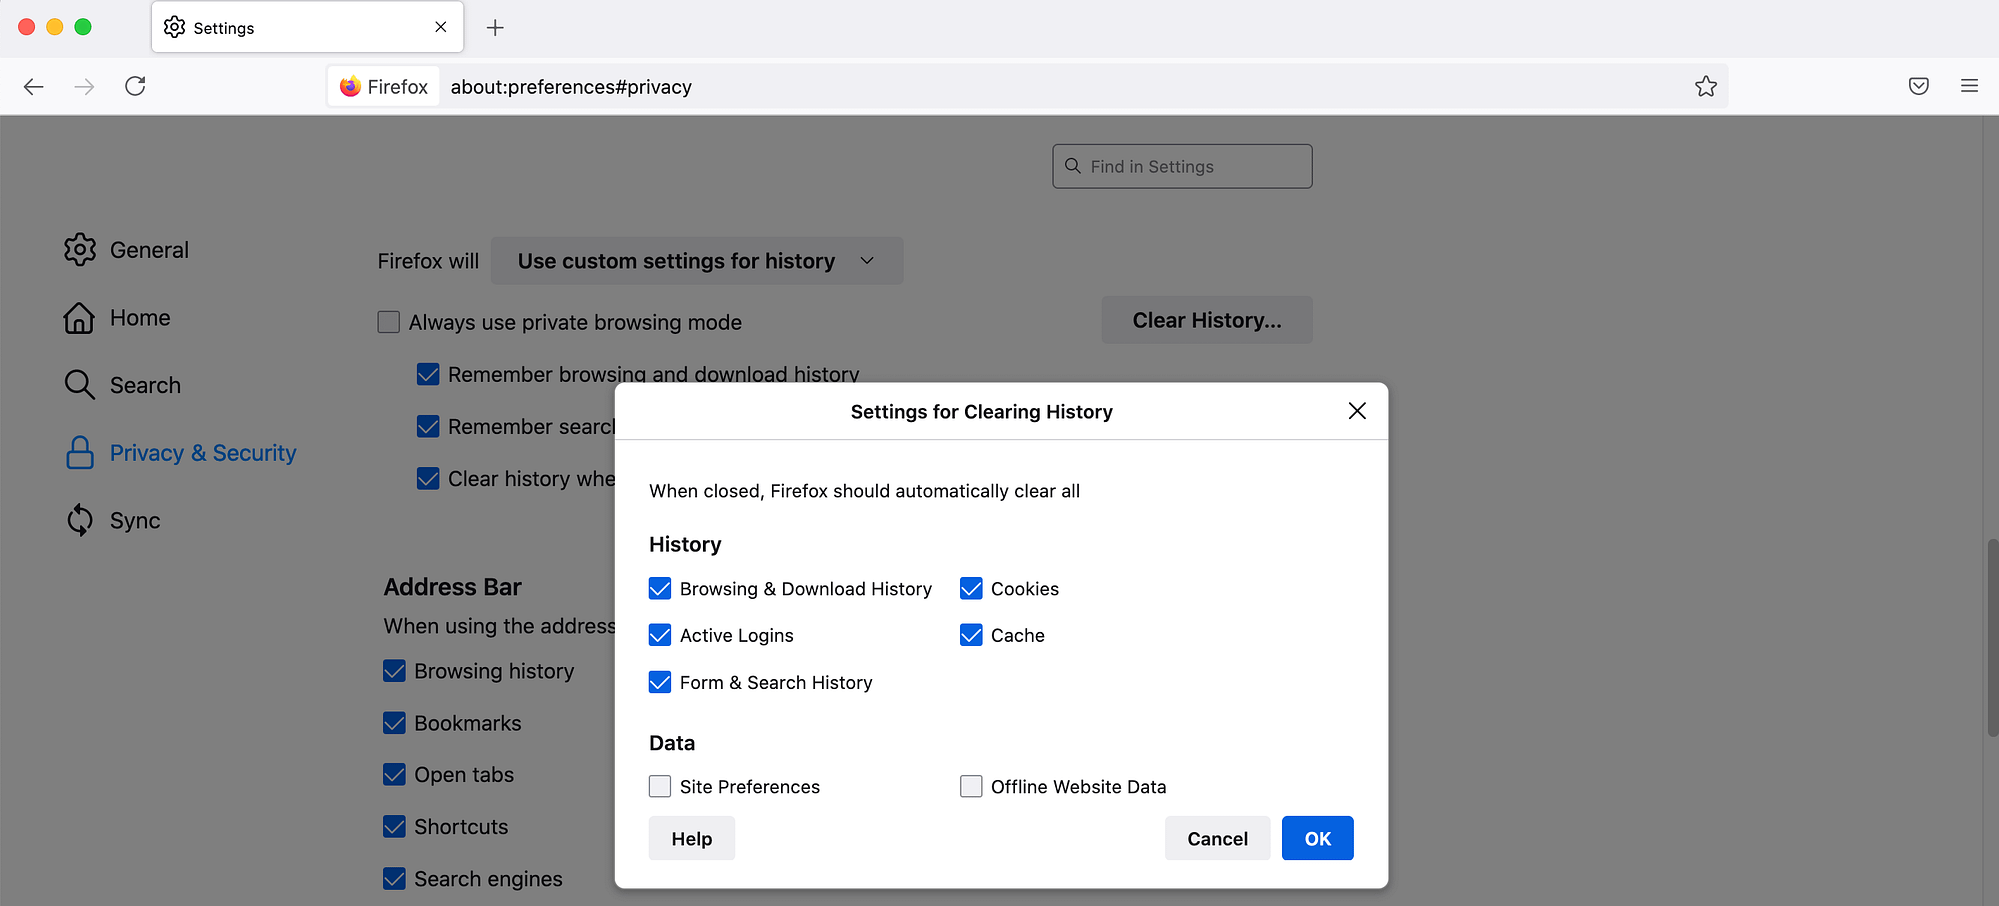 Firefox's settings for clearing history.